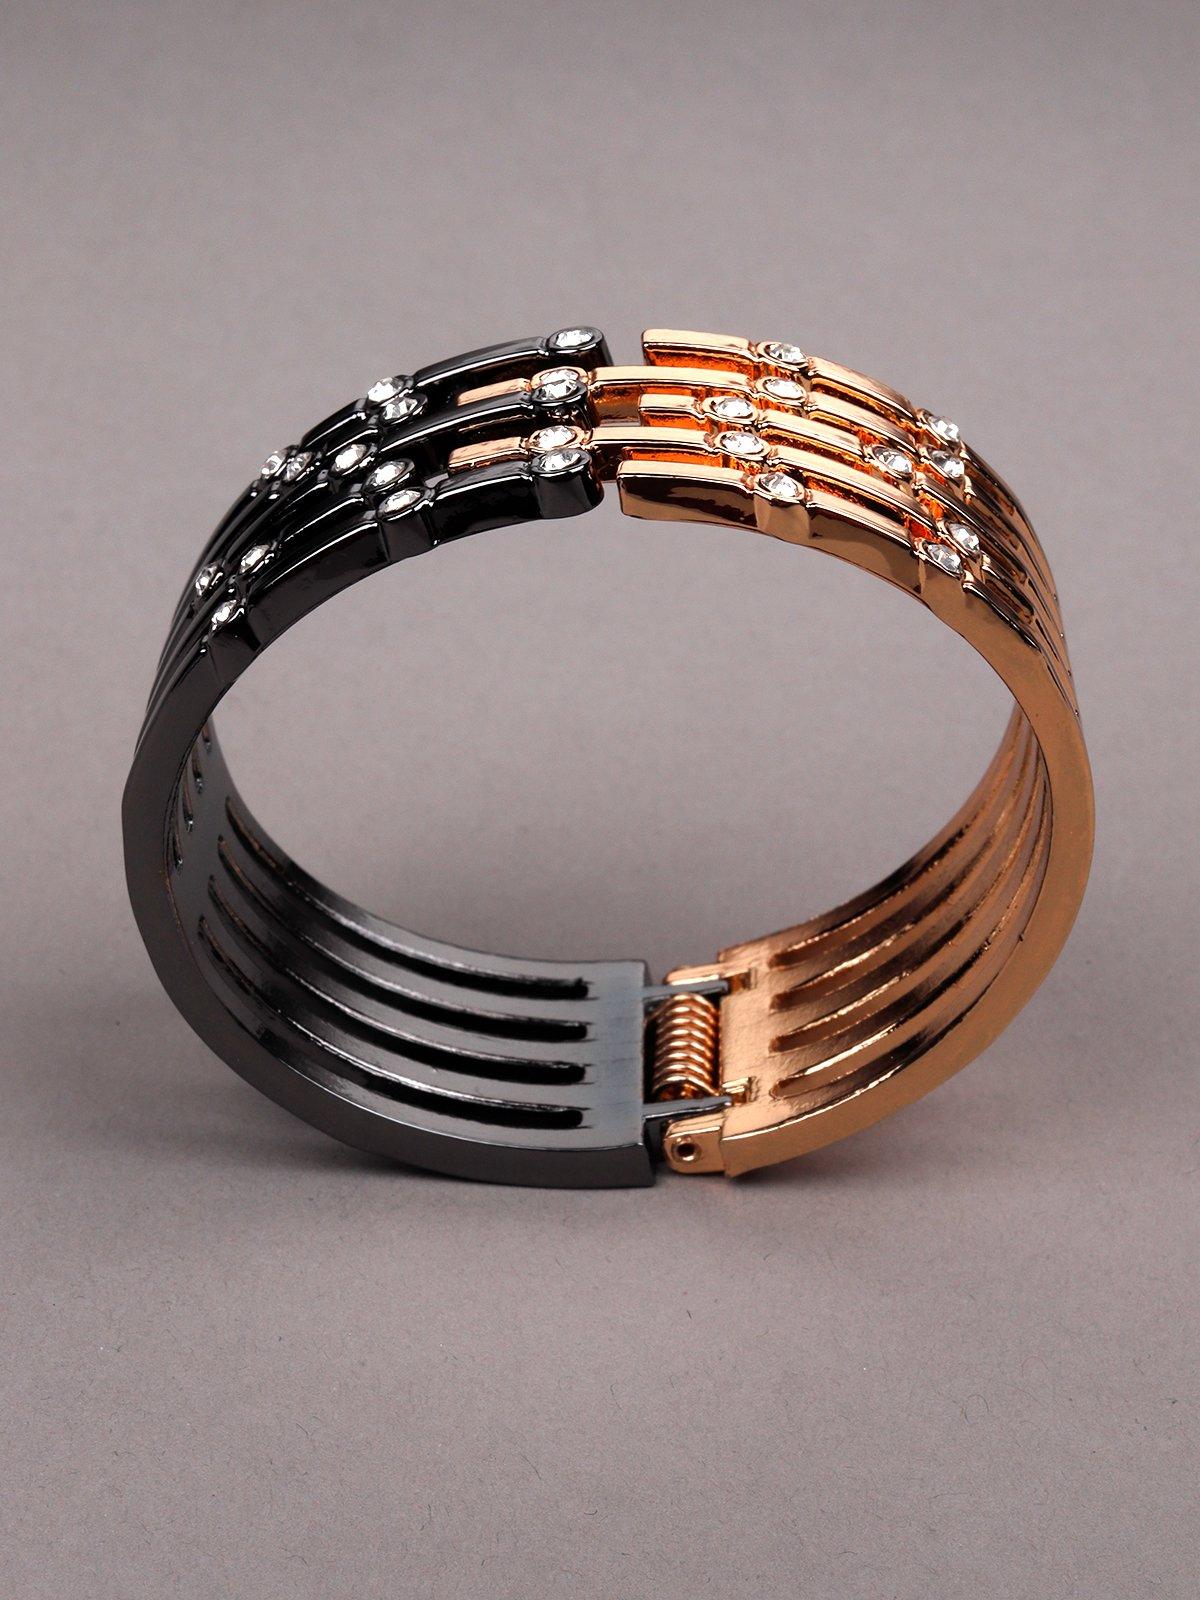 Dual coloured gold and smoke silver Bracelet - Odette